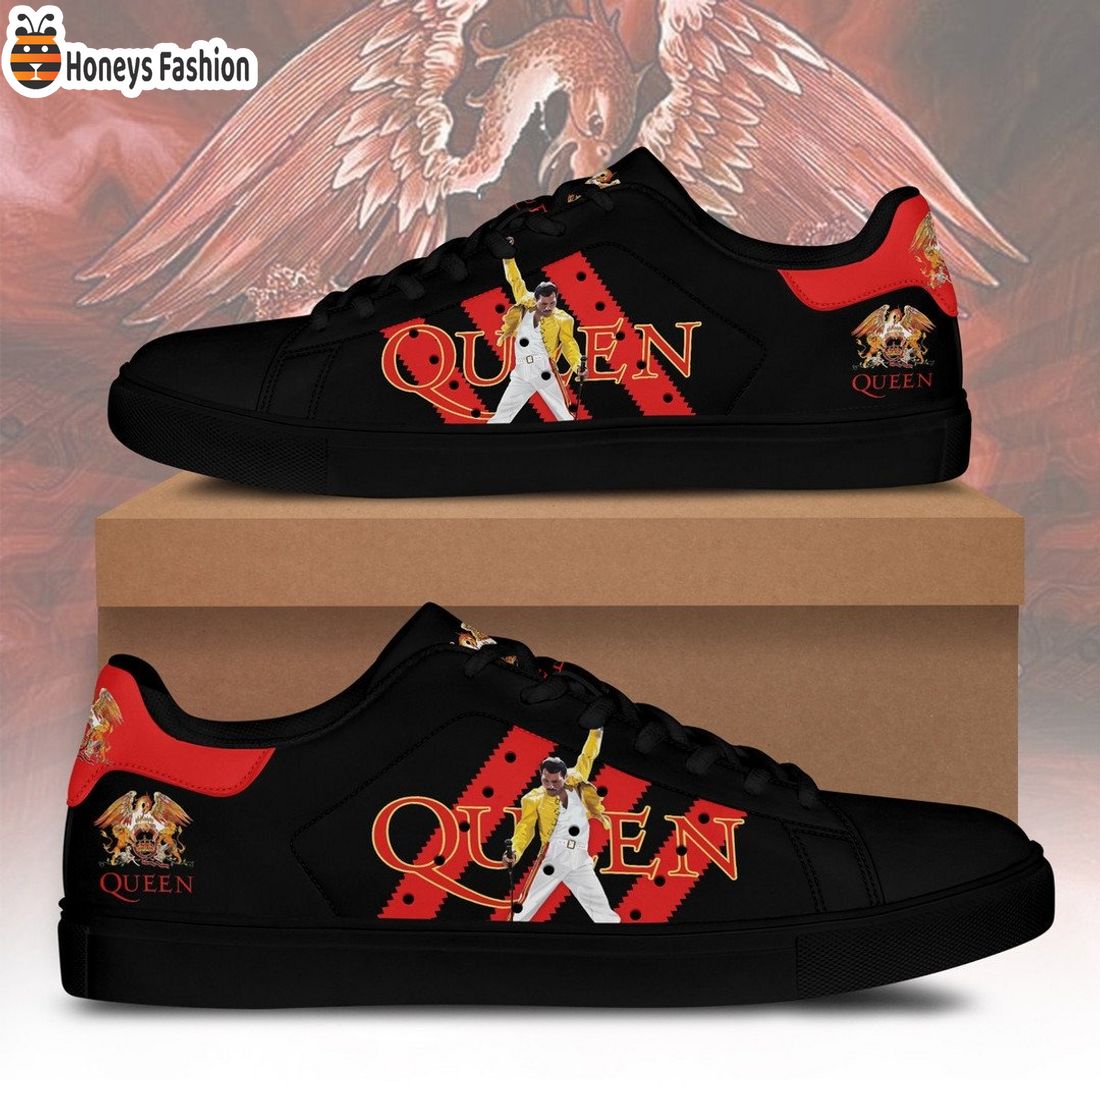 Queen rock band red ver 2 stan smith adidas shoes